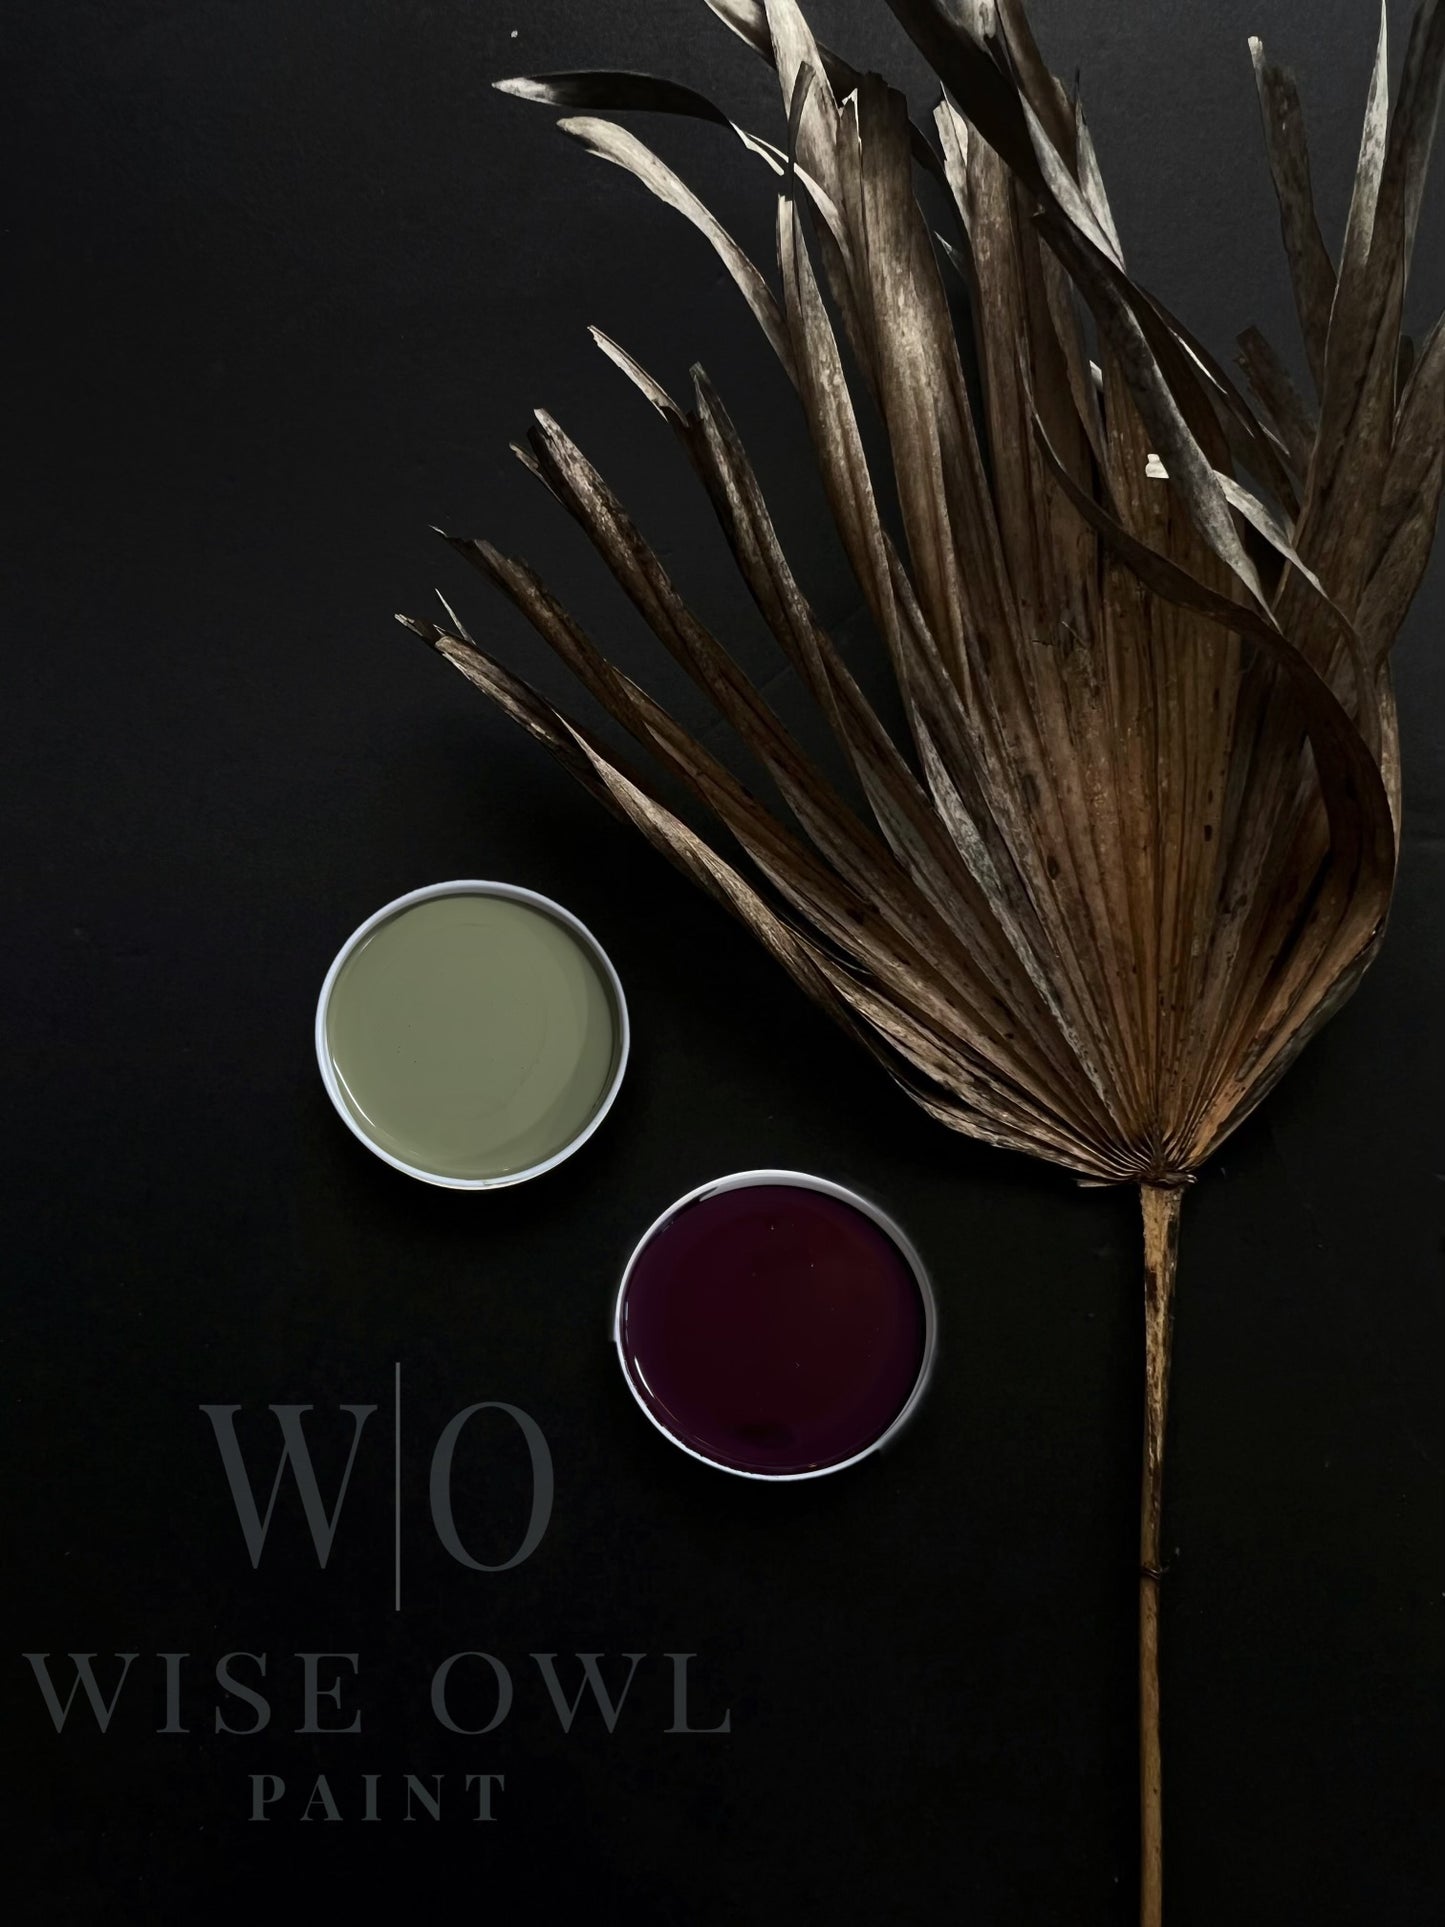 overland green and dark mahogany paint swatch from wise owl paint one hour enamel wilderness collection. dried palm leaf next to them. dark gray background